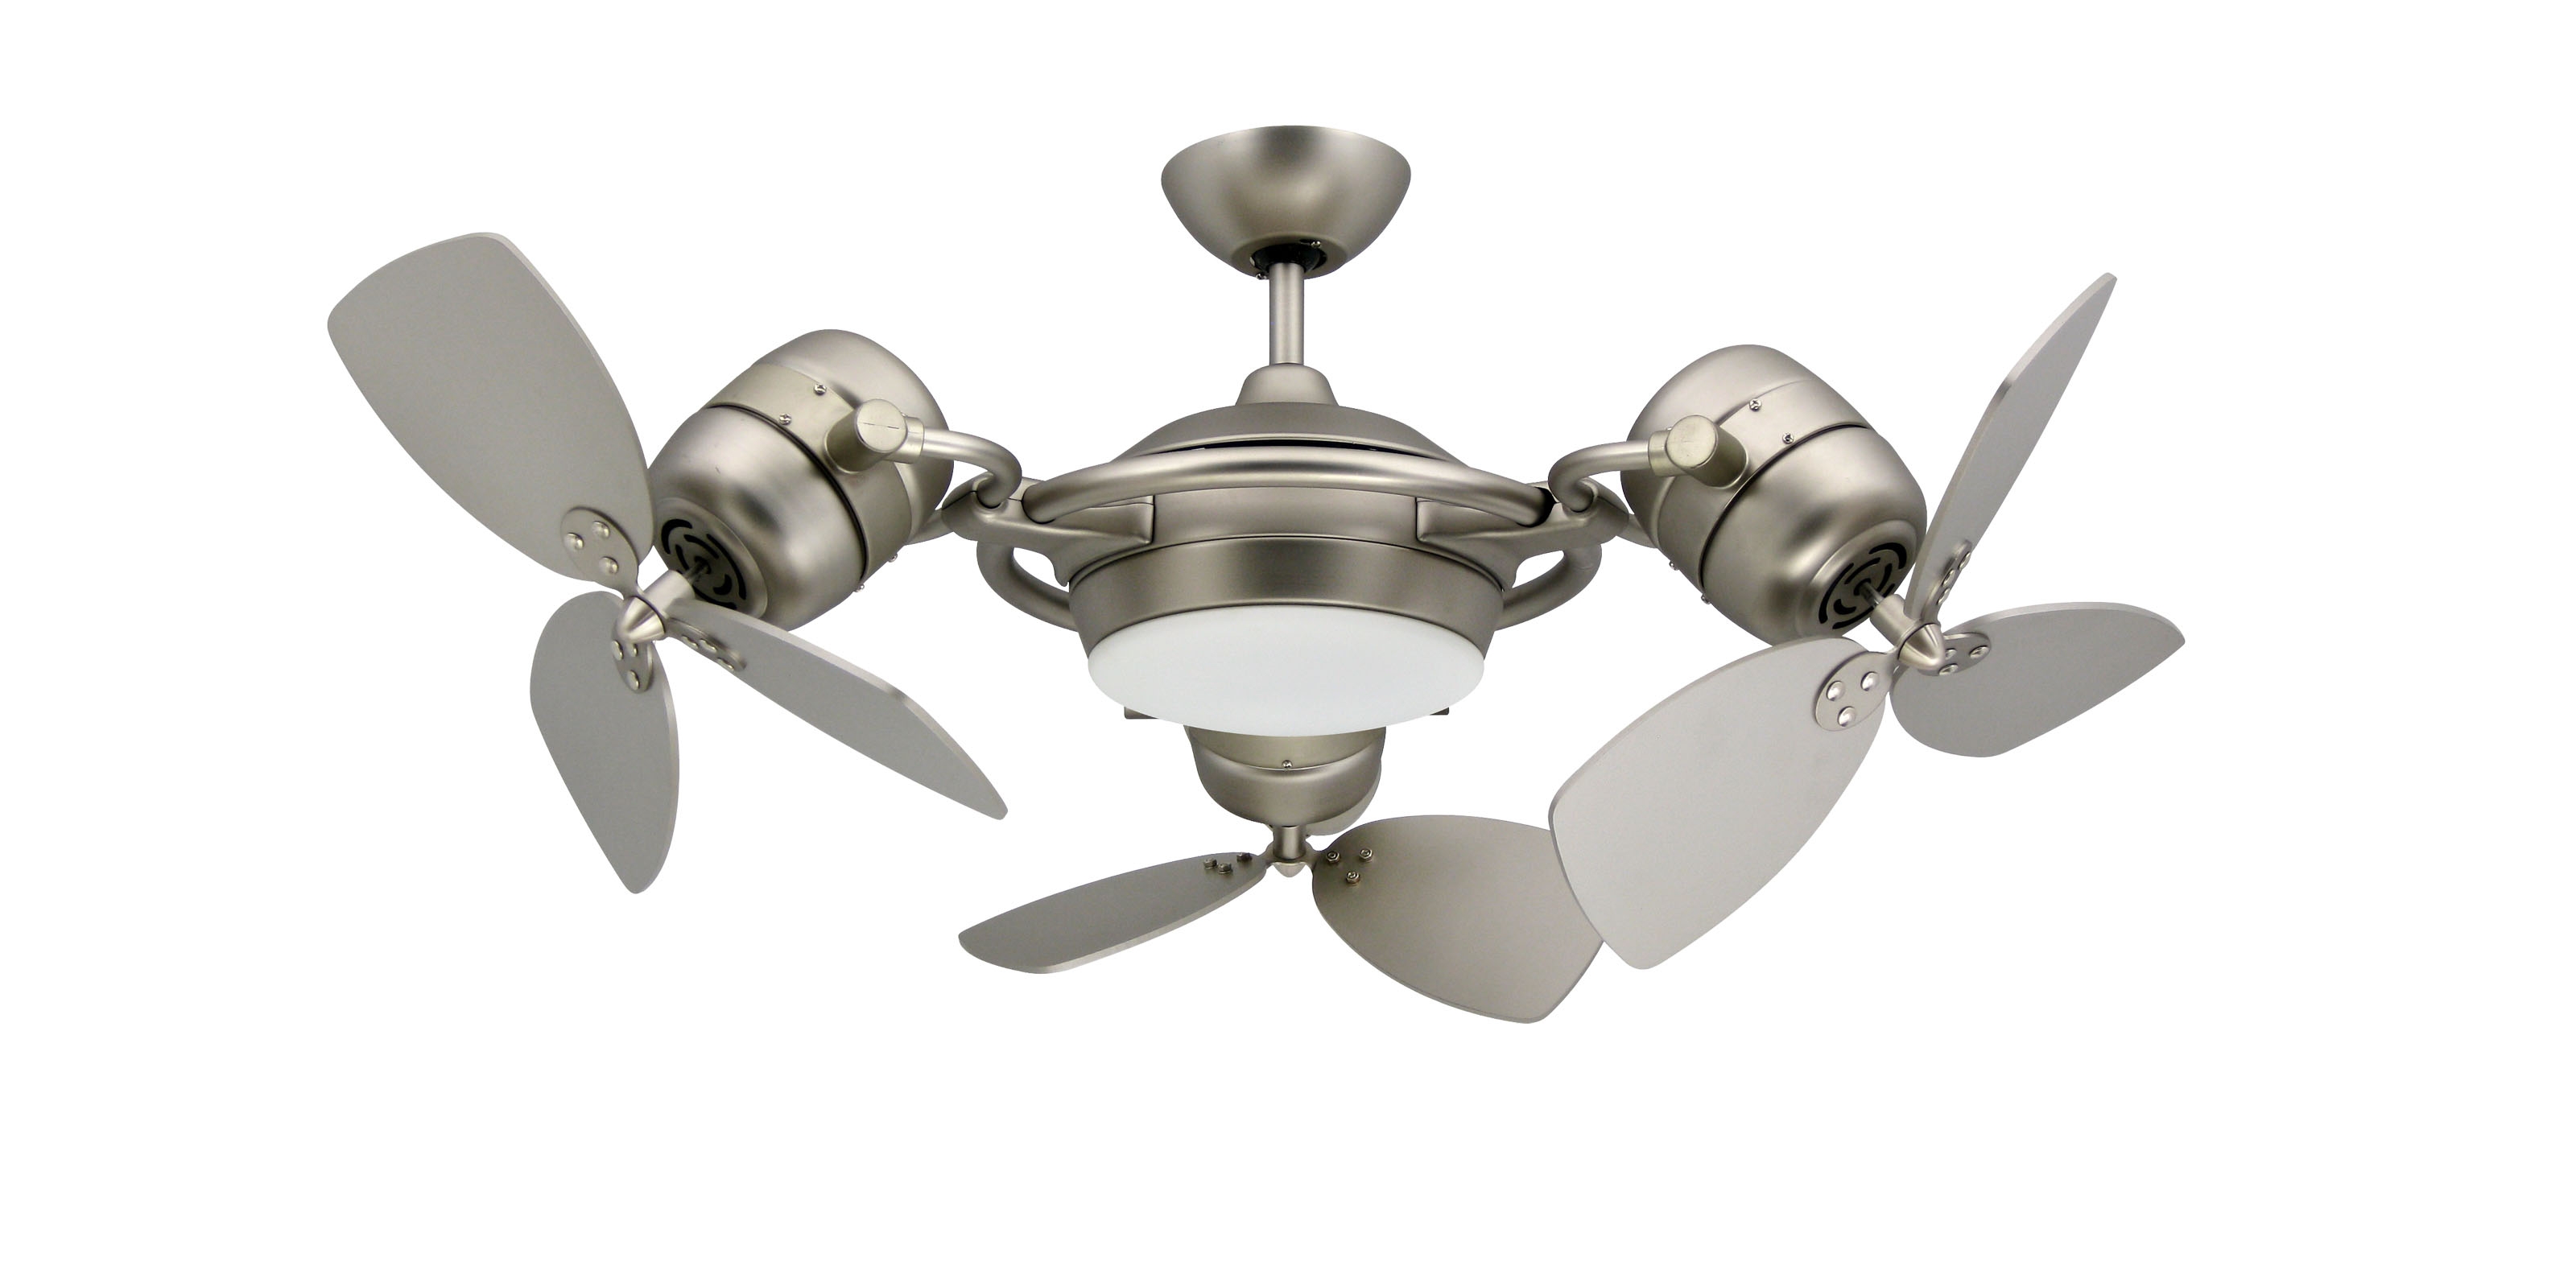 Cool Ceiling Fans With Lights3200 X 1568